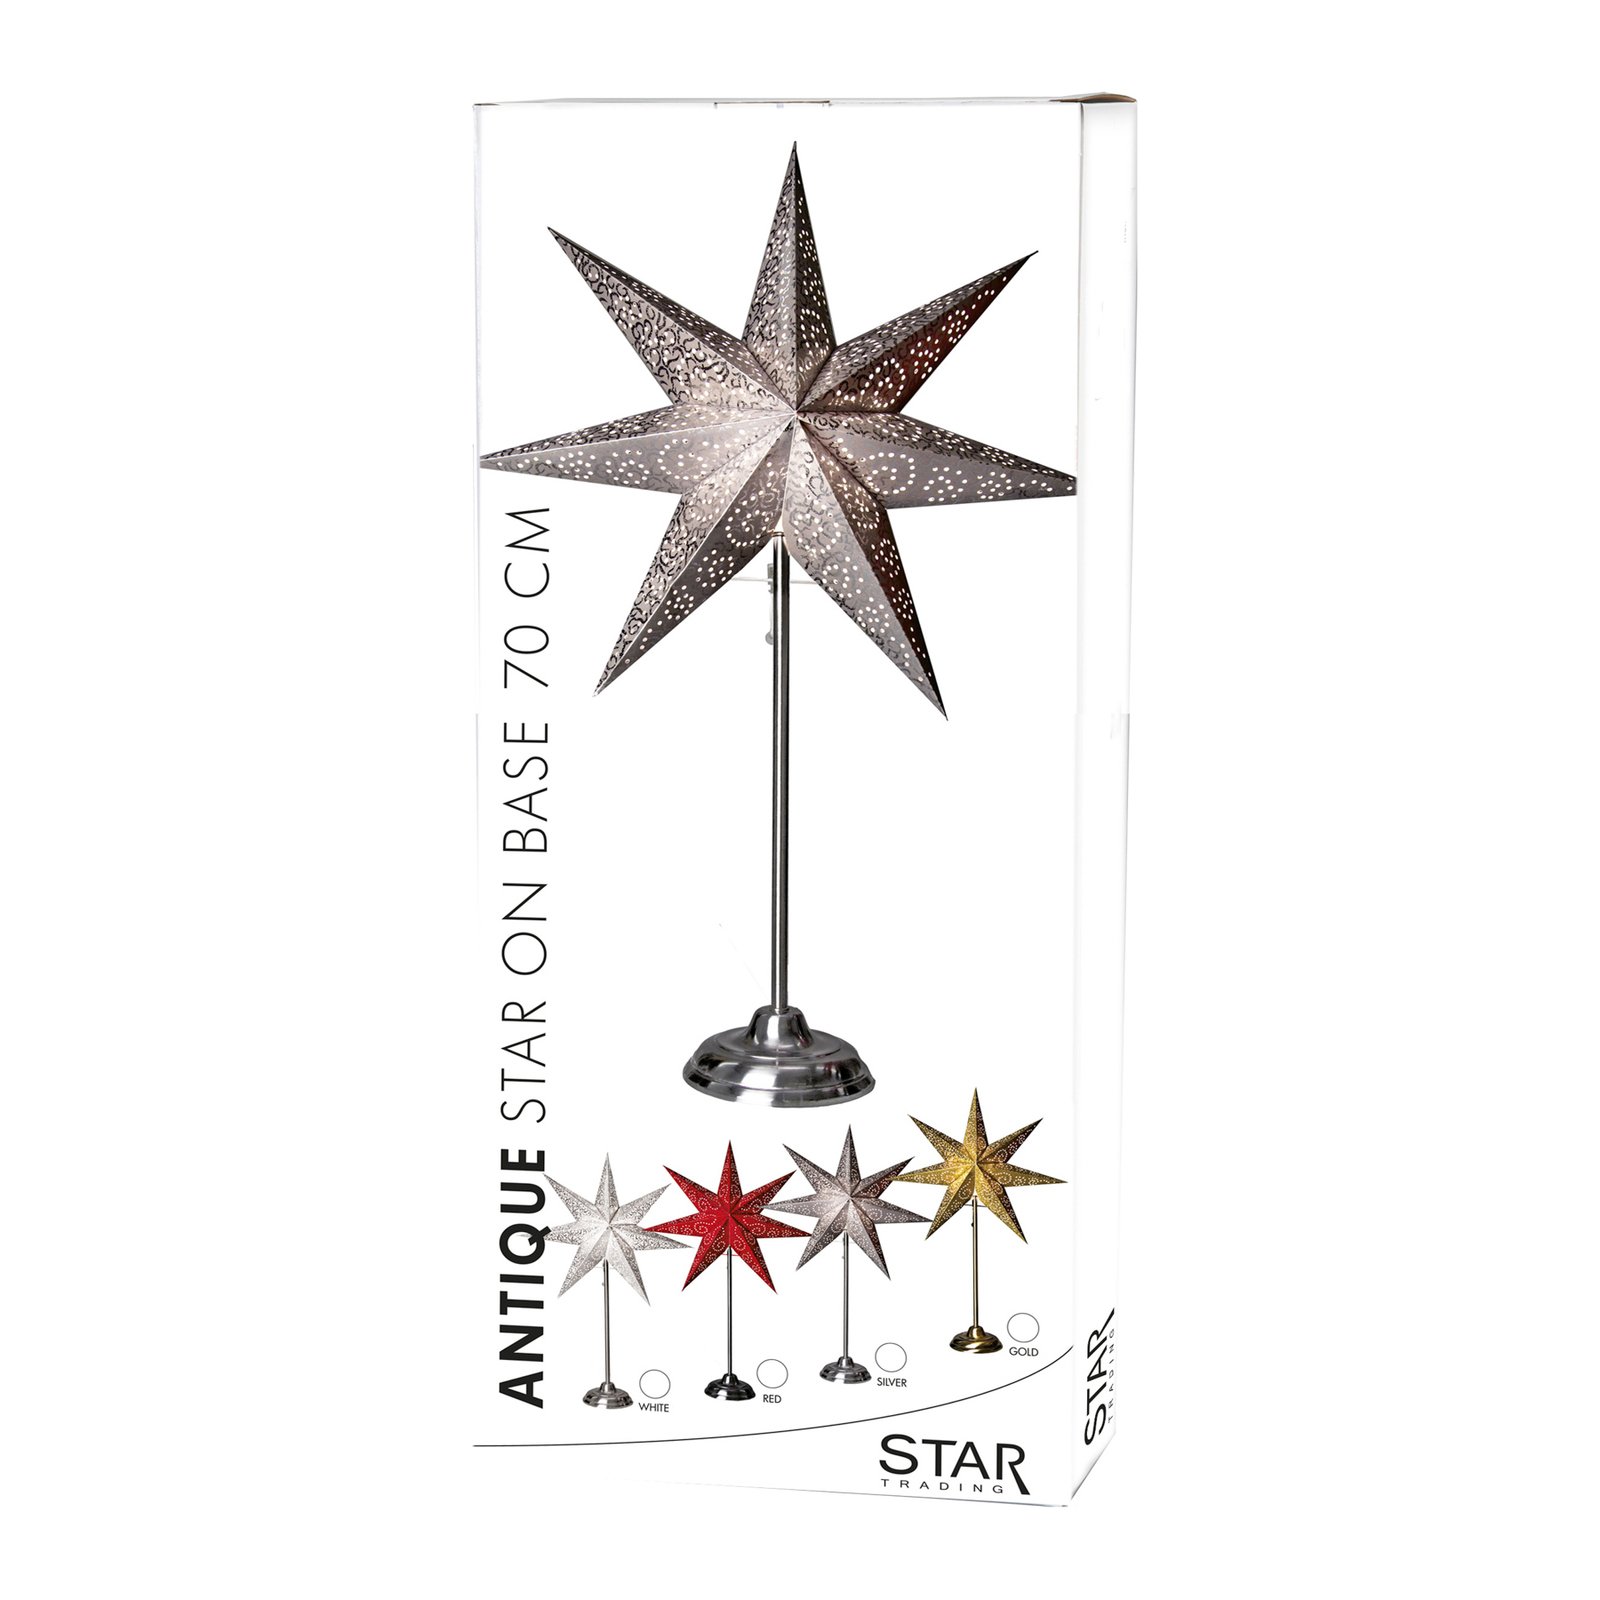 Antique standing star, metal/paper, red